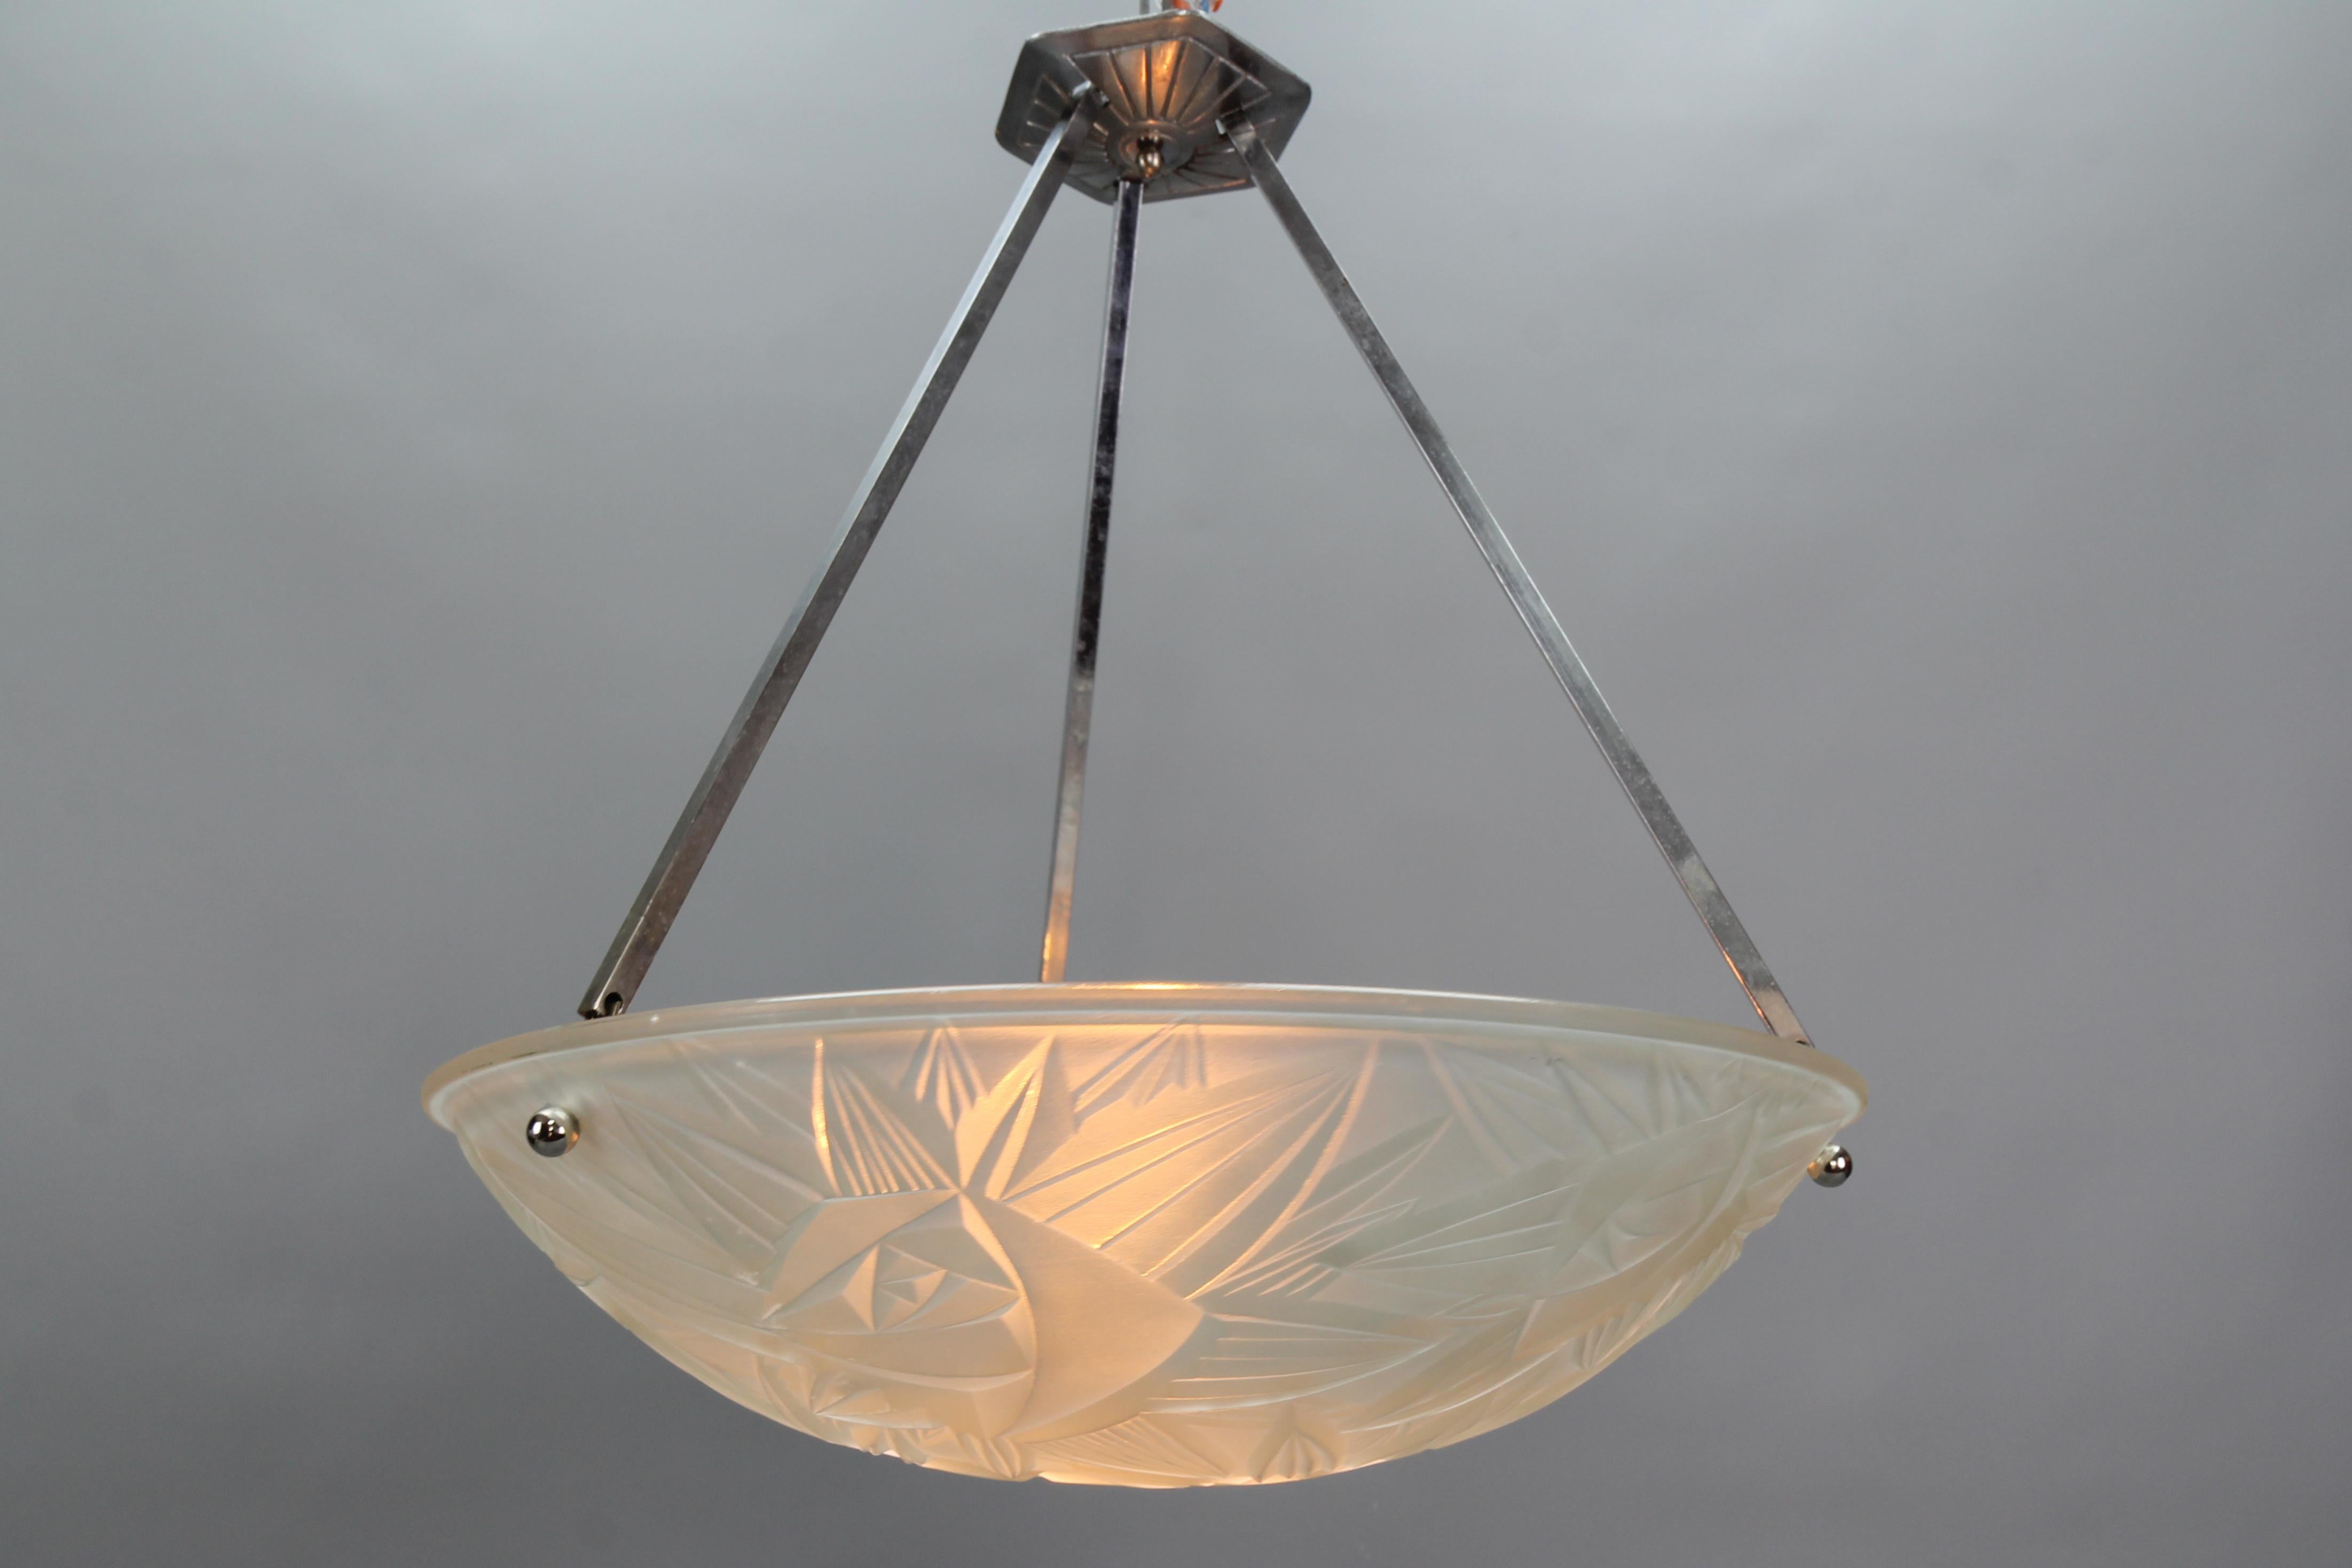 French Art Deco Chromed Brass and Frosted Glass Pendant Light by Noverdy, 1930s For Sale 1